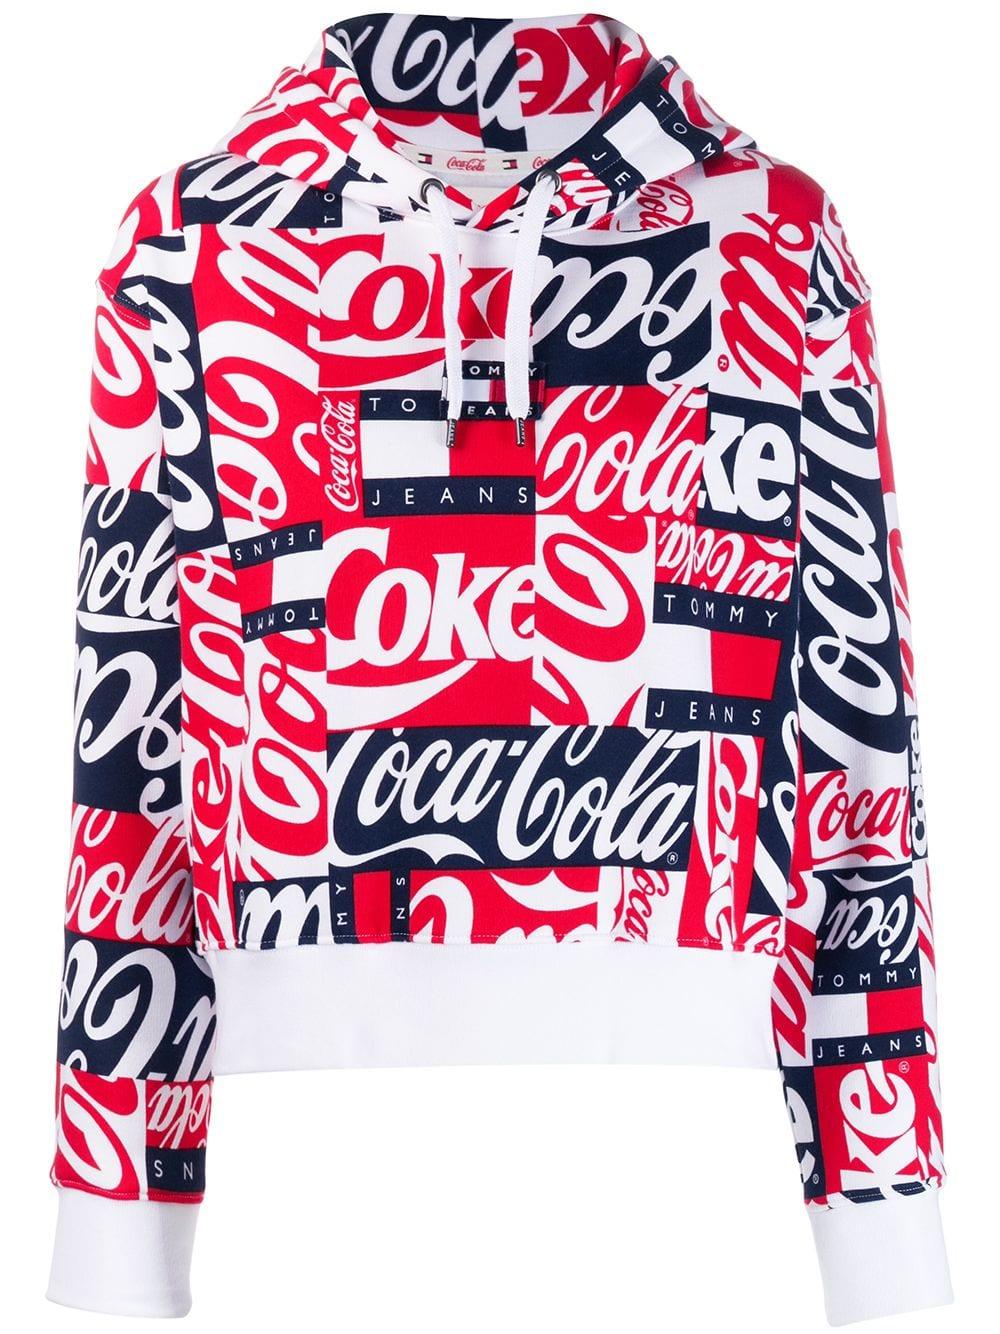 tommy jeans coca cola sweater